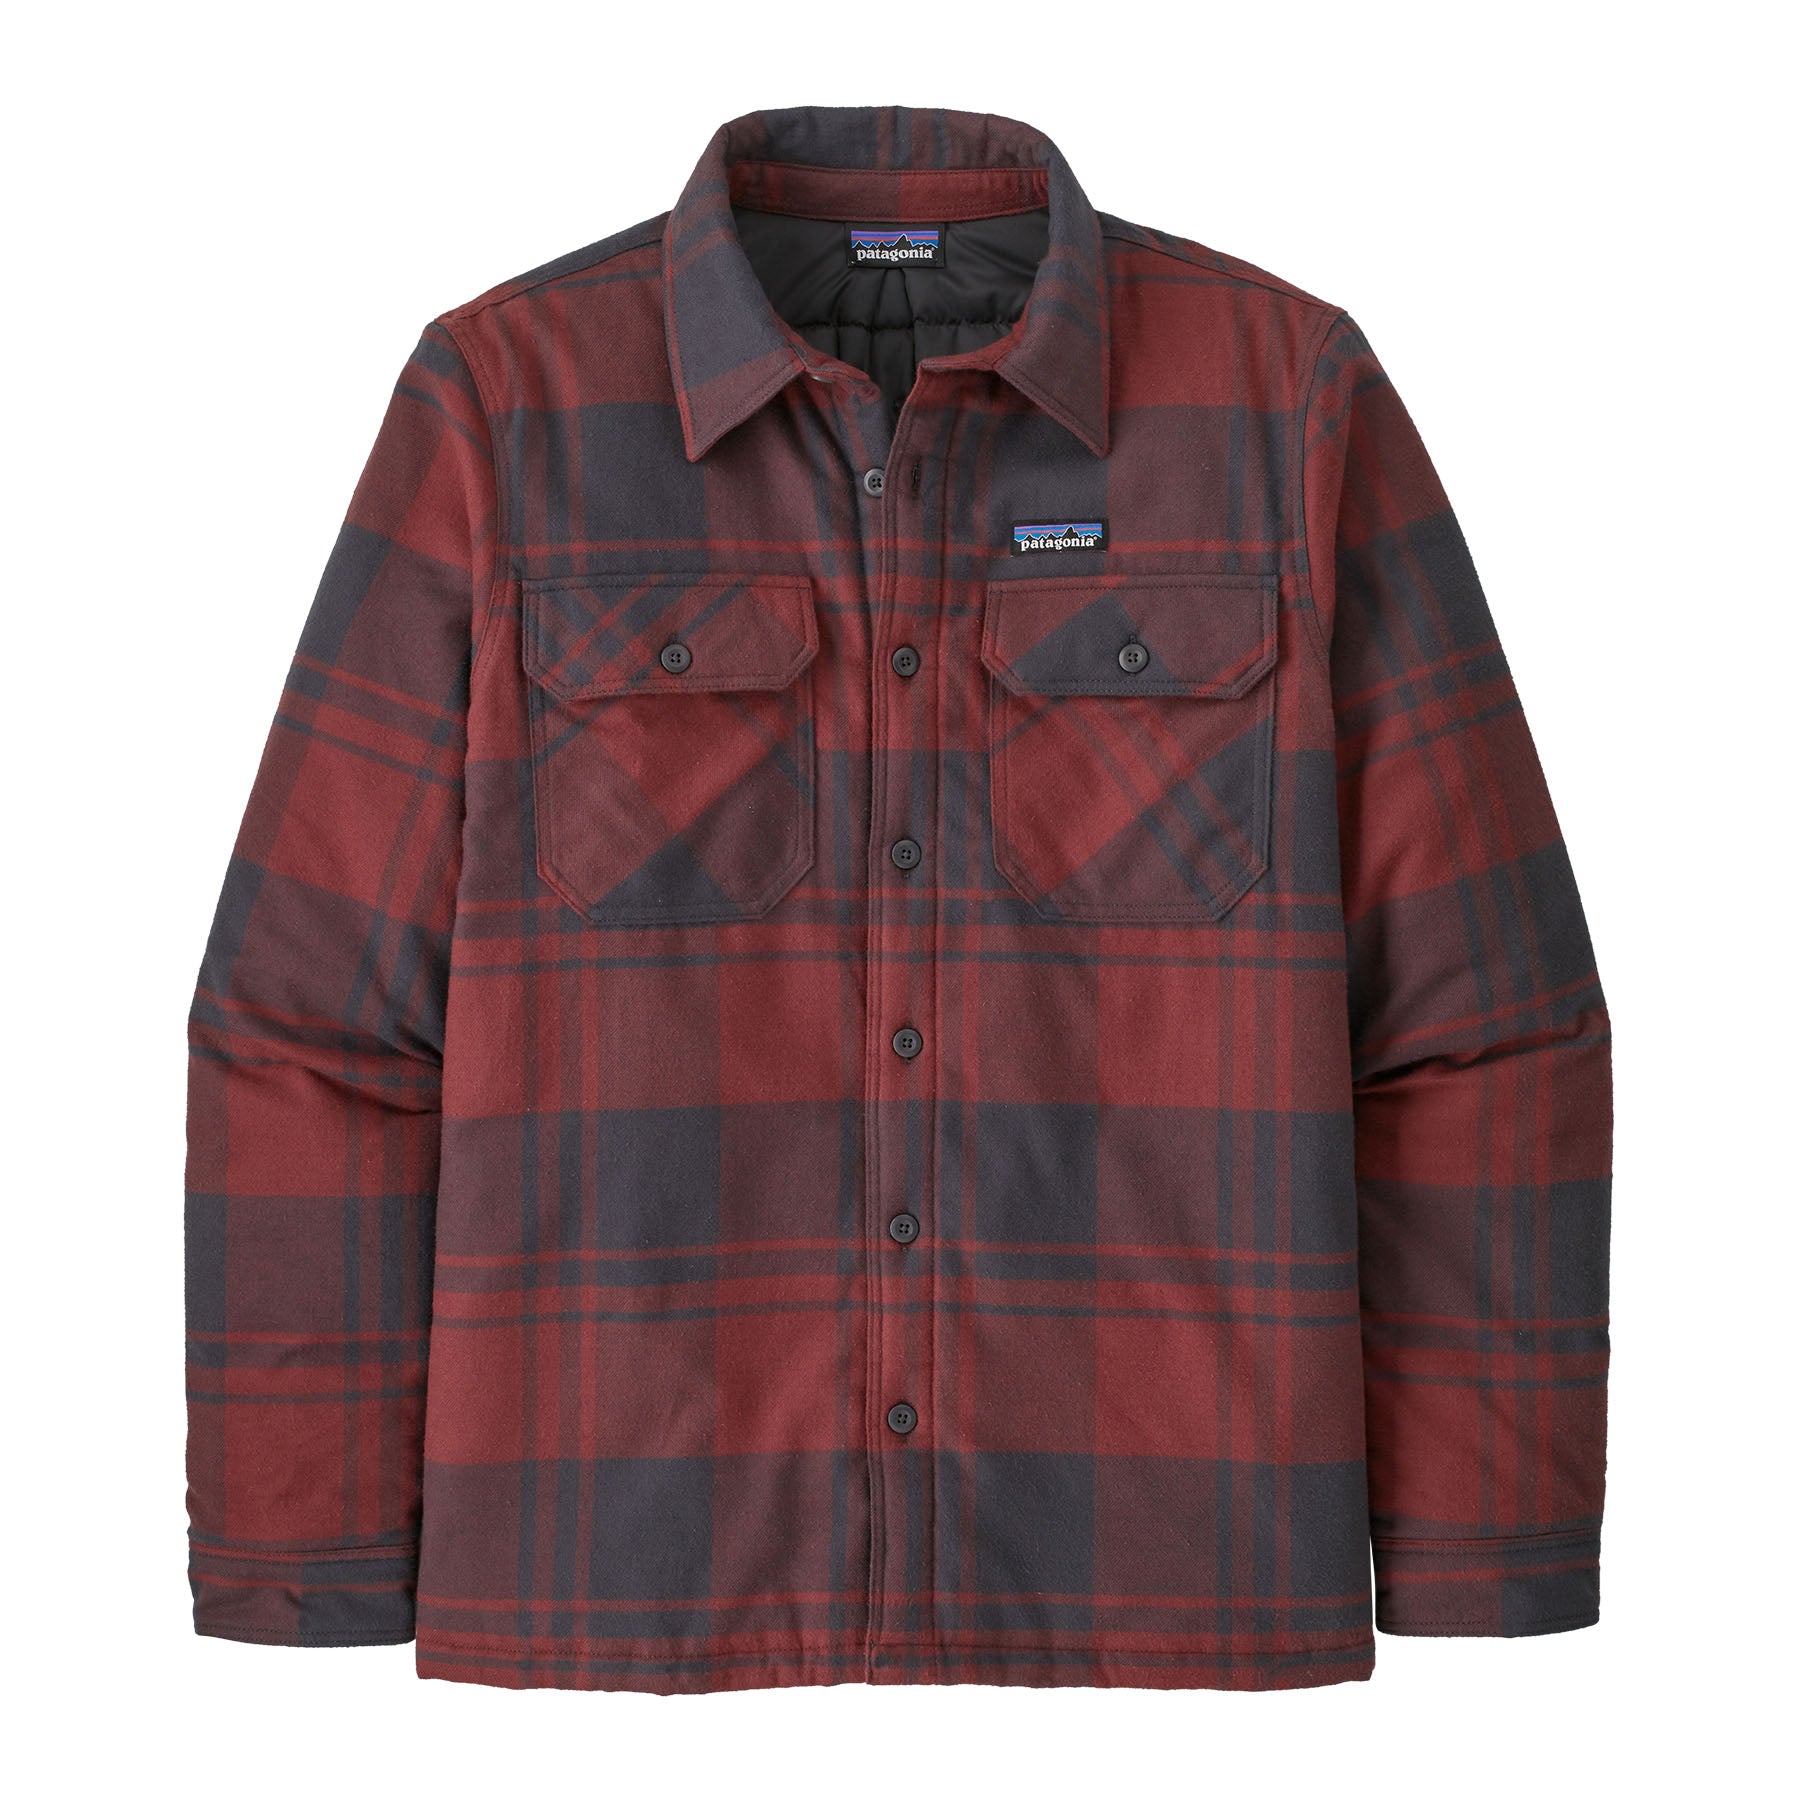 Patagonia Men's Insulated Organic Cotton Midweight Fjord Flannel Shirt 